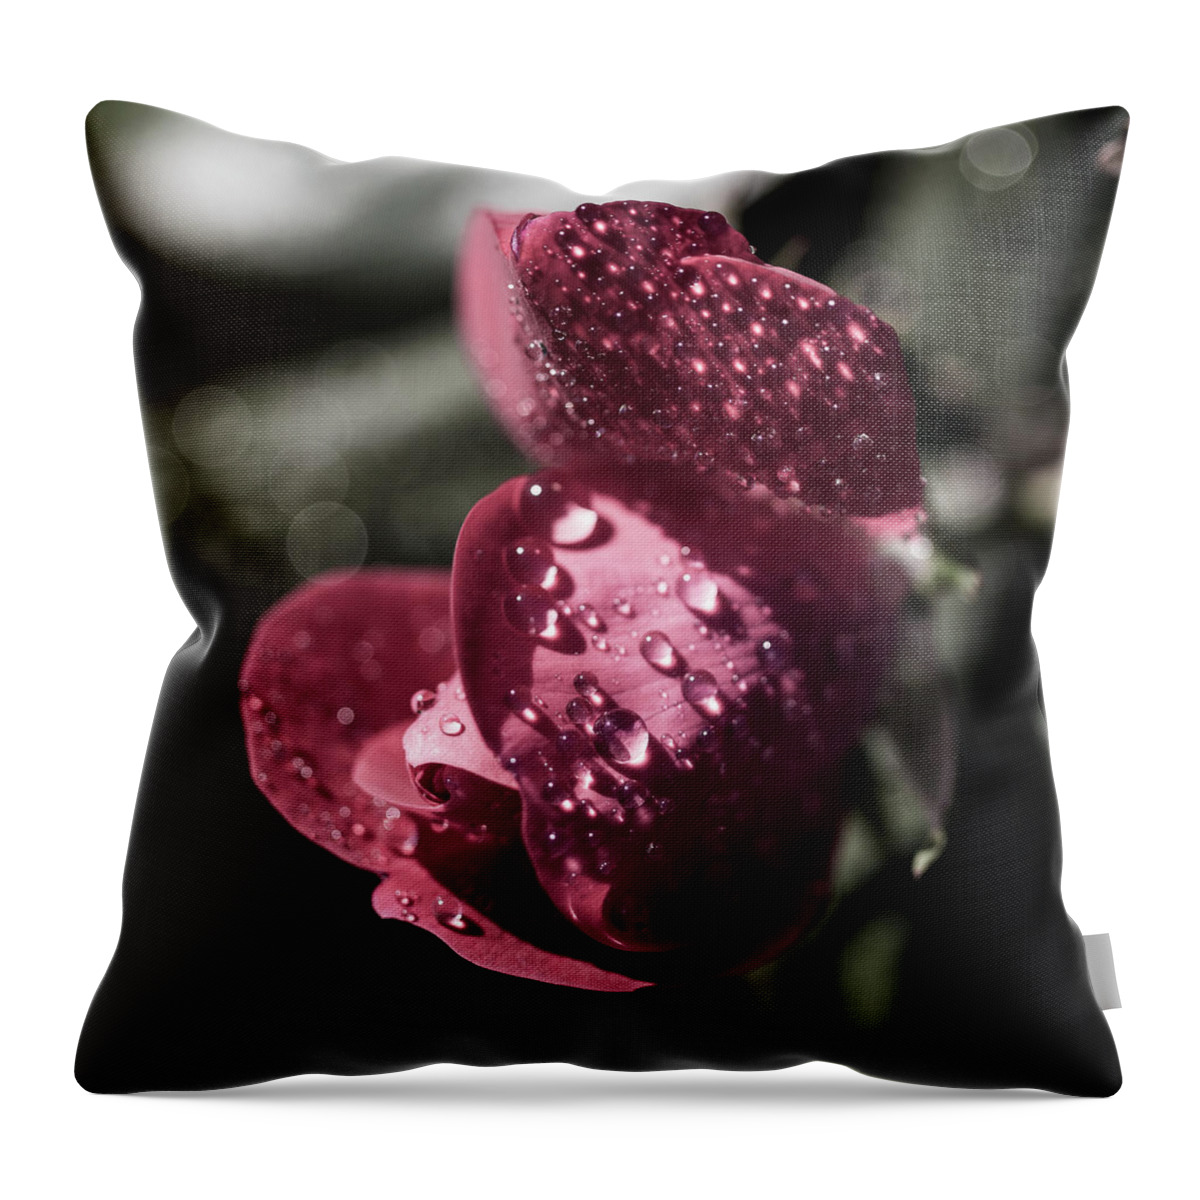 Flower Throw Pillow featuring the photograph Rose by David Beechum